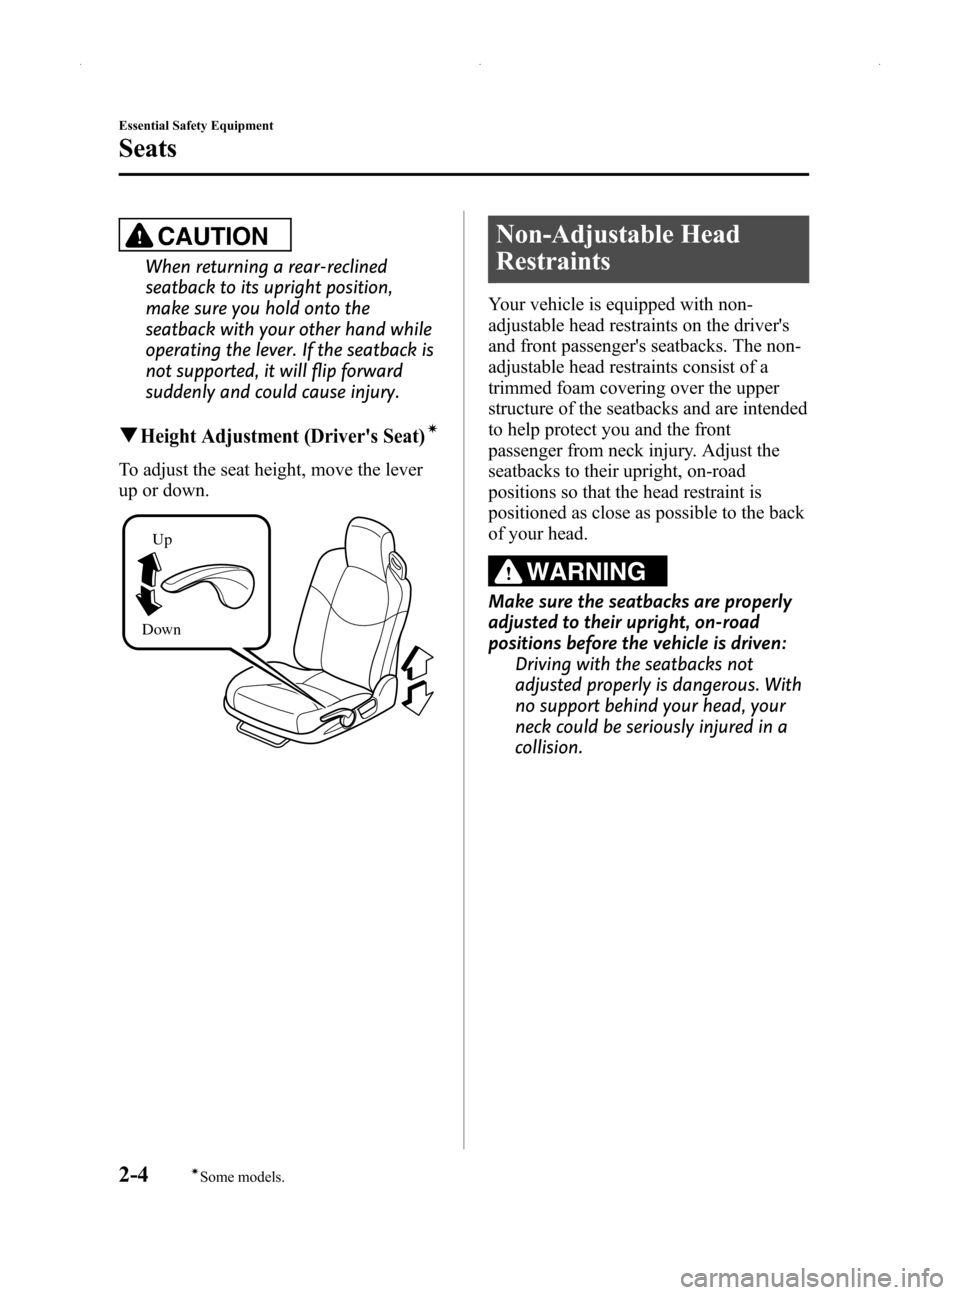 MAZDA MODEL MX-5 2014  Owners Manual (in English) Black plate (16,1)
CAUTION
When returning a rear-reclined
seatback to its upright position,
make sure you hold onto the
seatback with your other hand while
operating the lever. If the seatback is
not 